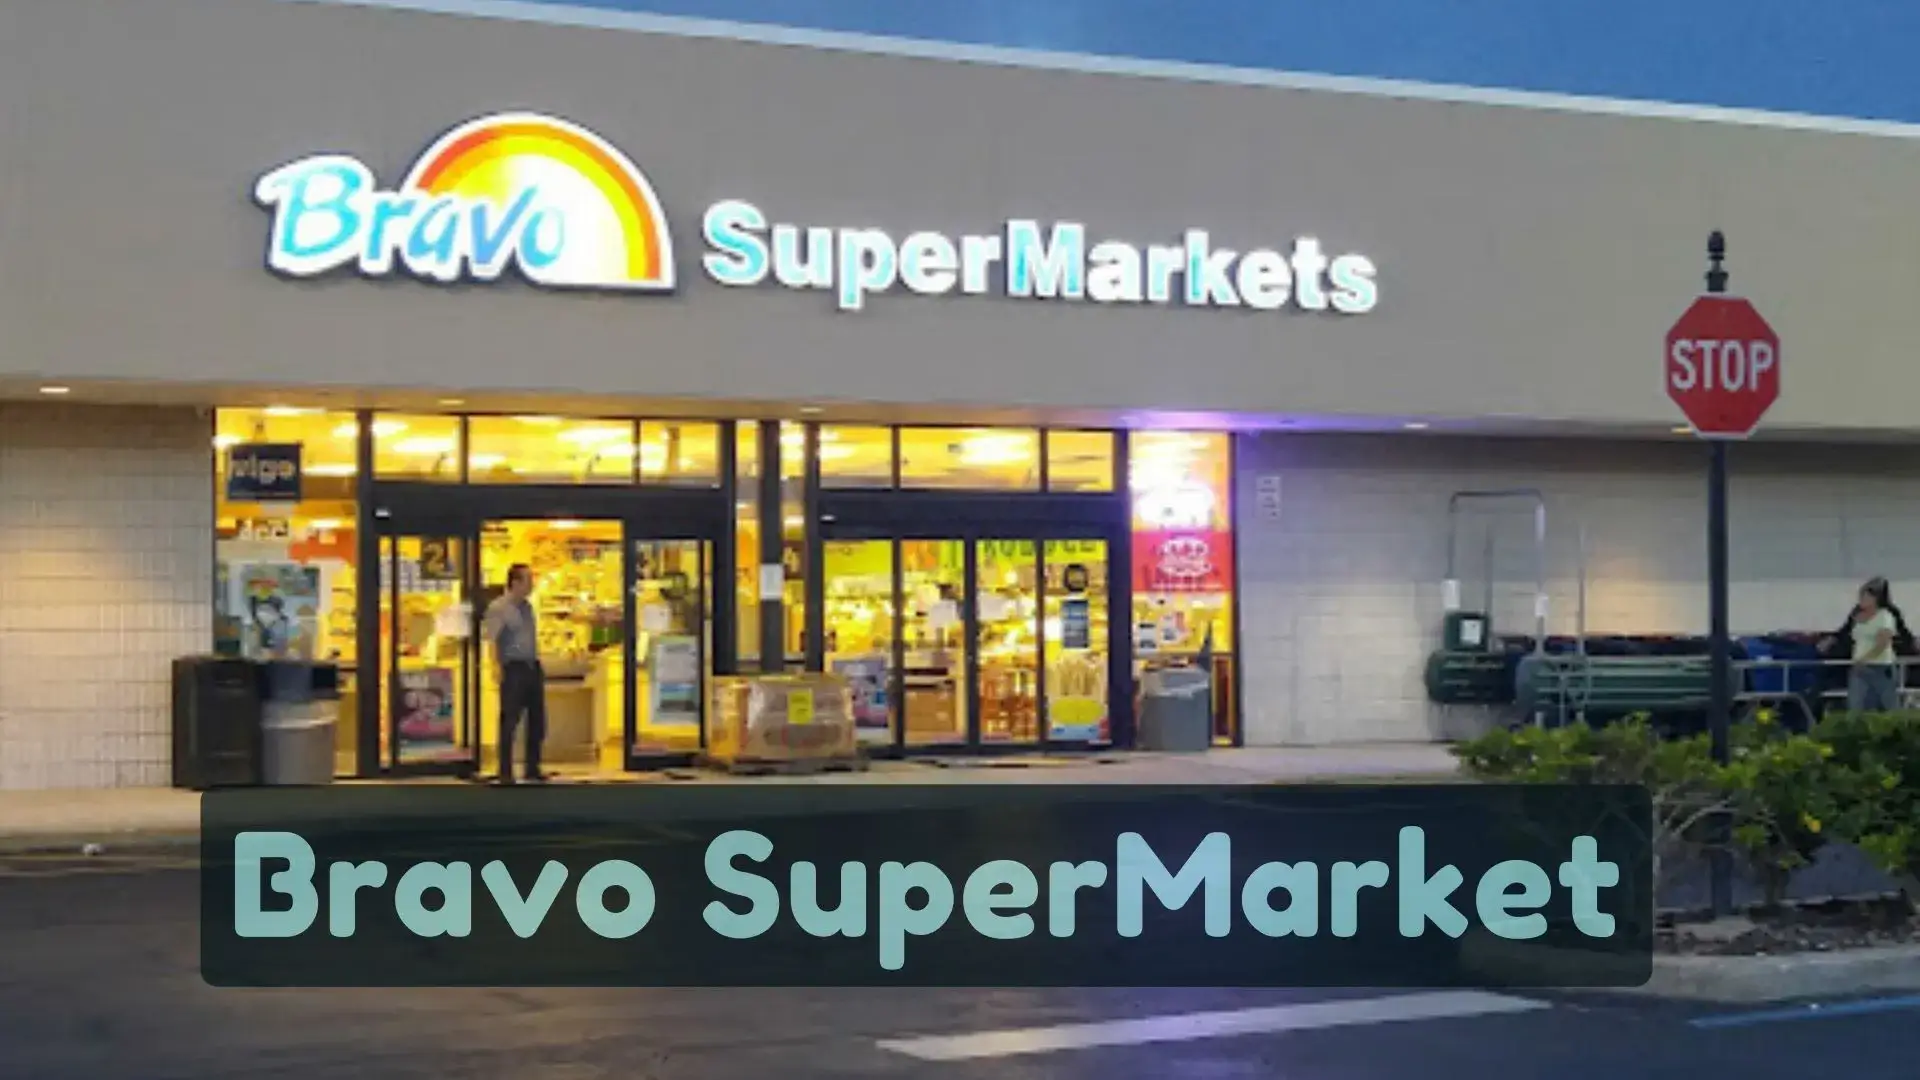 Are You Searching For Bravo Supermarket Locations Near You | Then Read This Guide To Find Bravo Supermarket Near Me And Its Operating Hours.